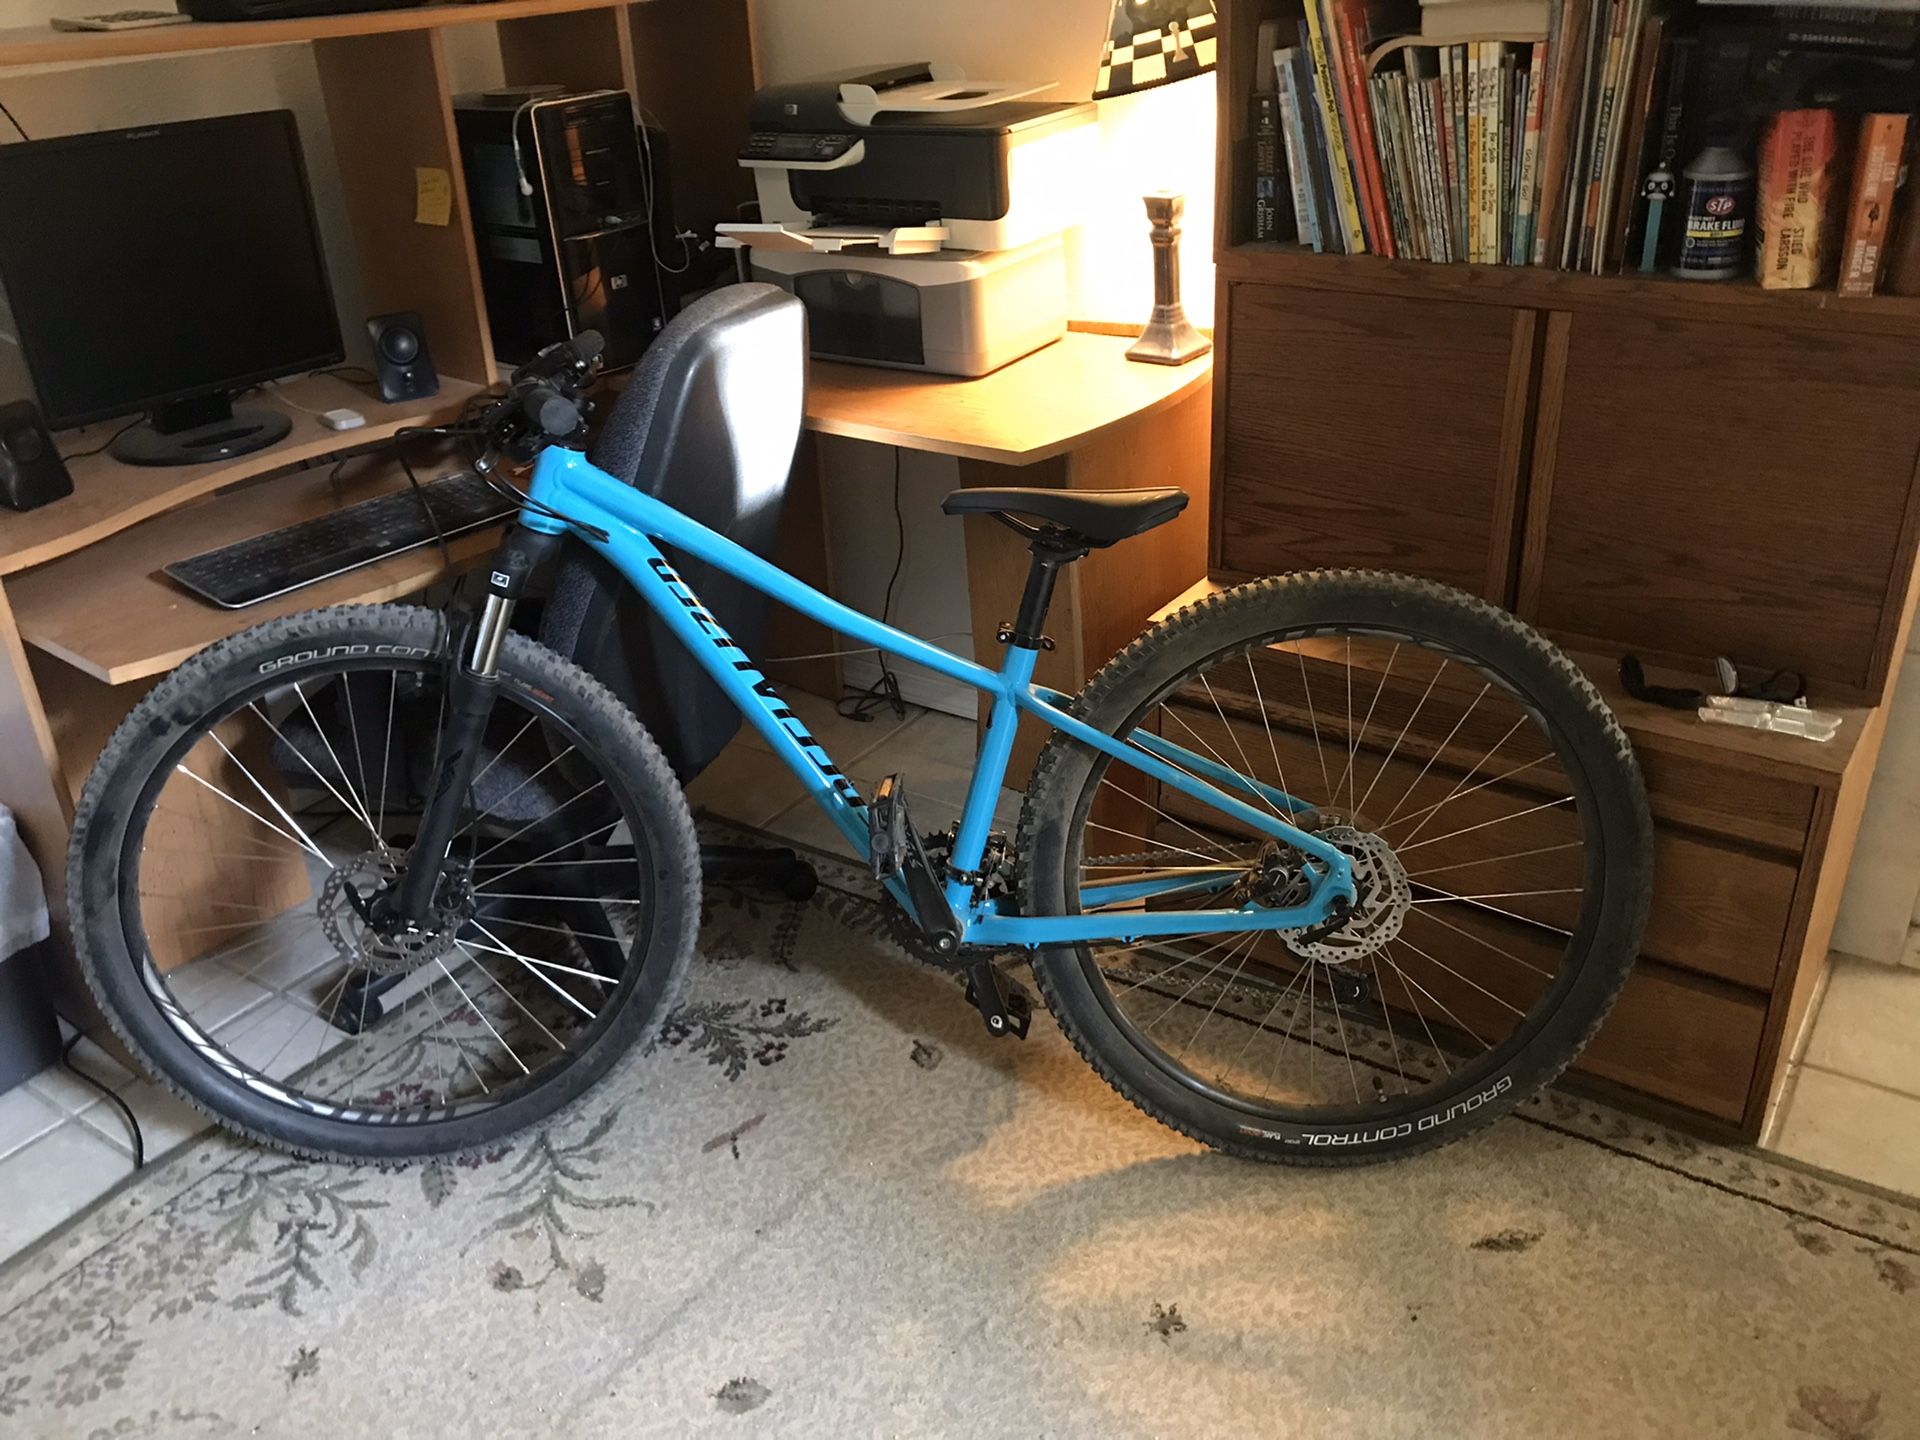 Nice and new specialized mountain/downhill bike